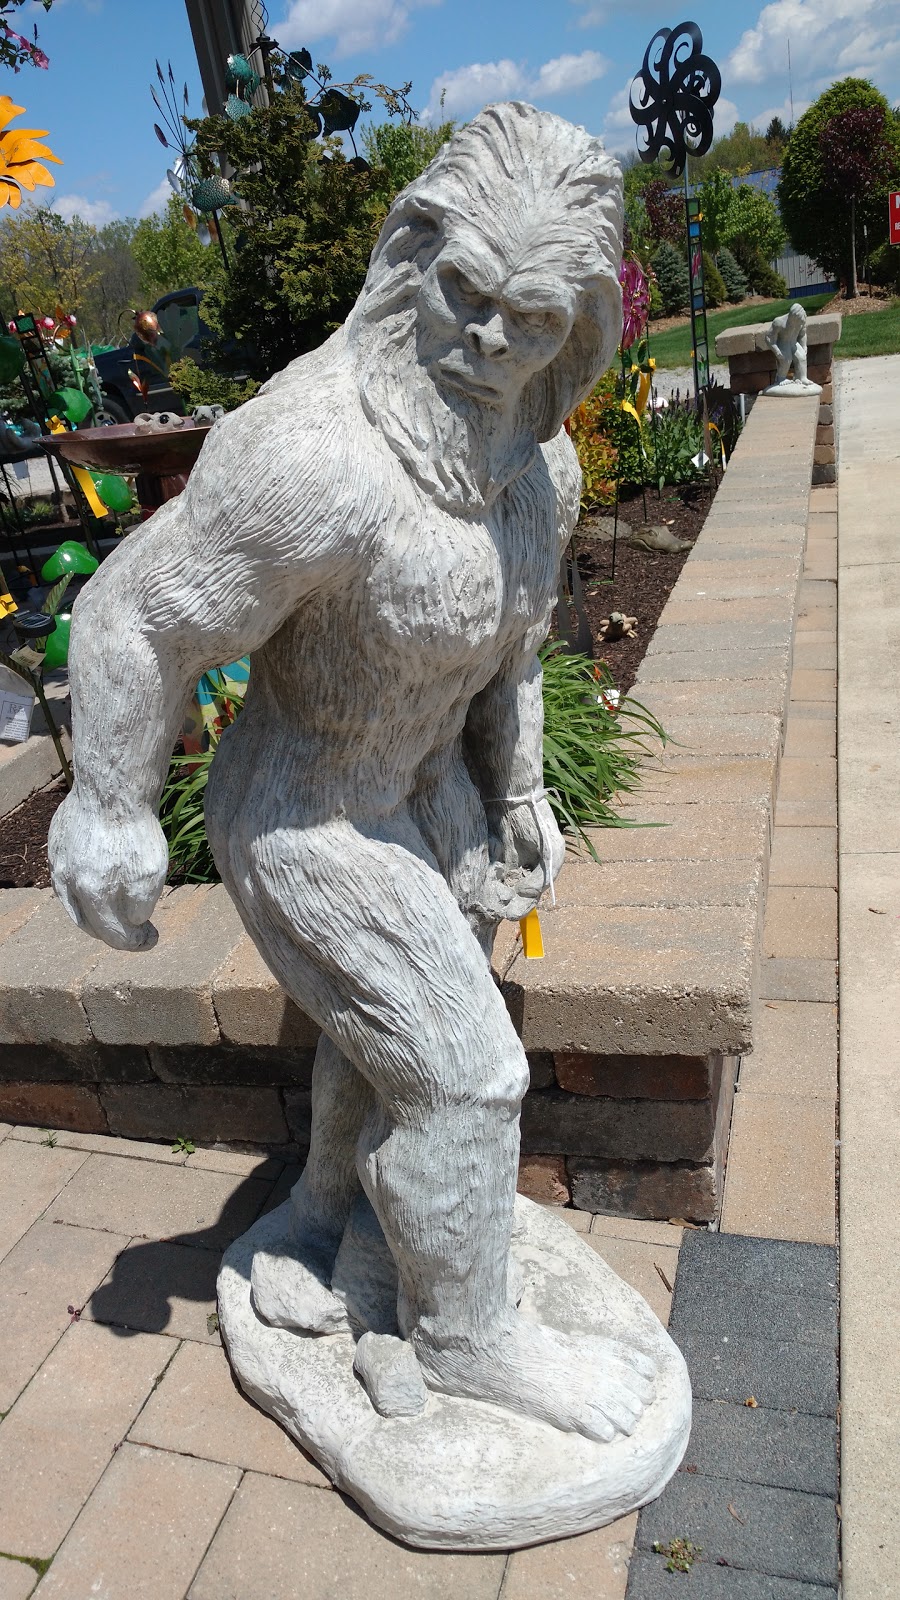 Arnolds Landscaping and Garden Center | 3180 Park Ave W, Ontario, OH 44906 | Phone: (419) 529-6900